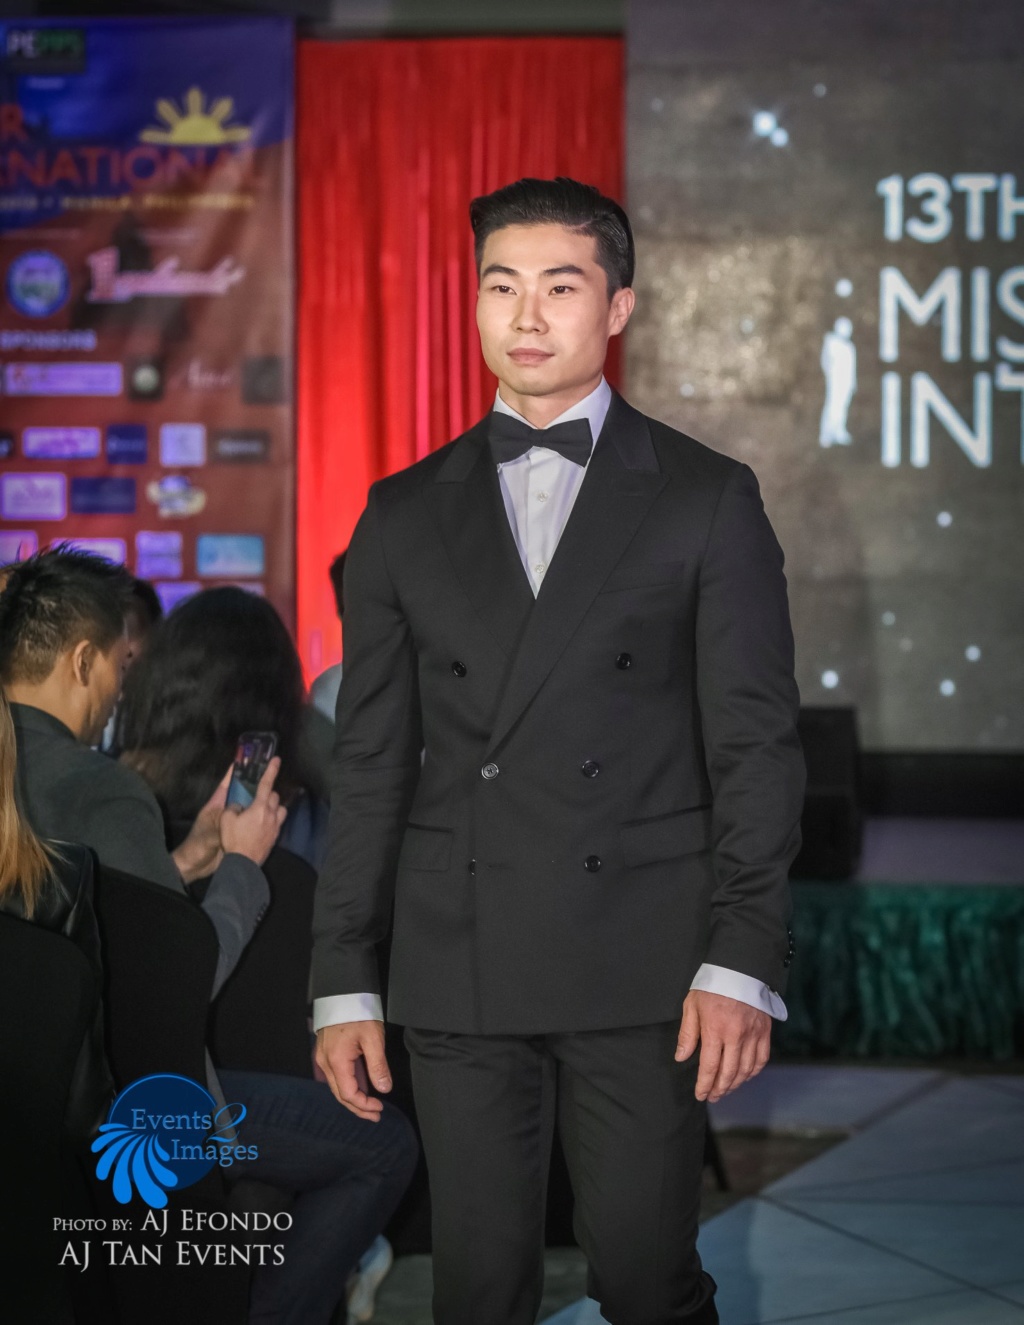 The 13th Mister International in Manila, Philippines on February 24,2019 - Page 10 52345111